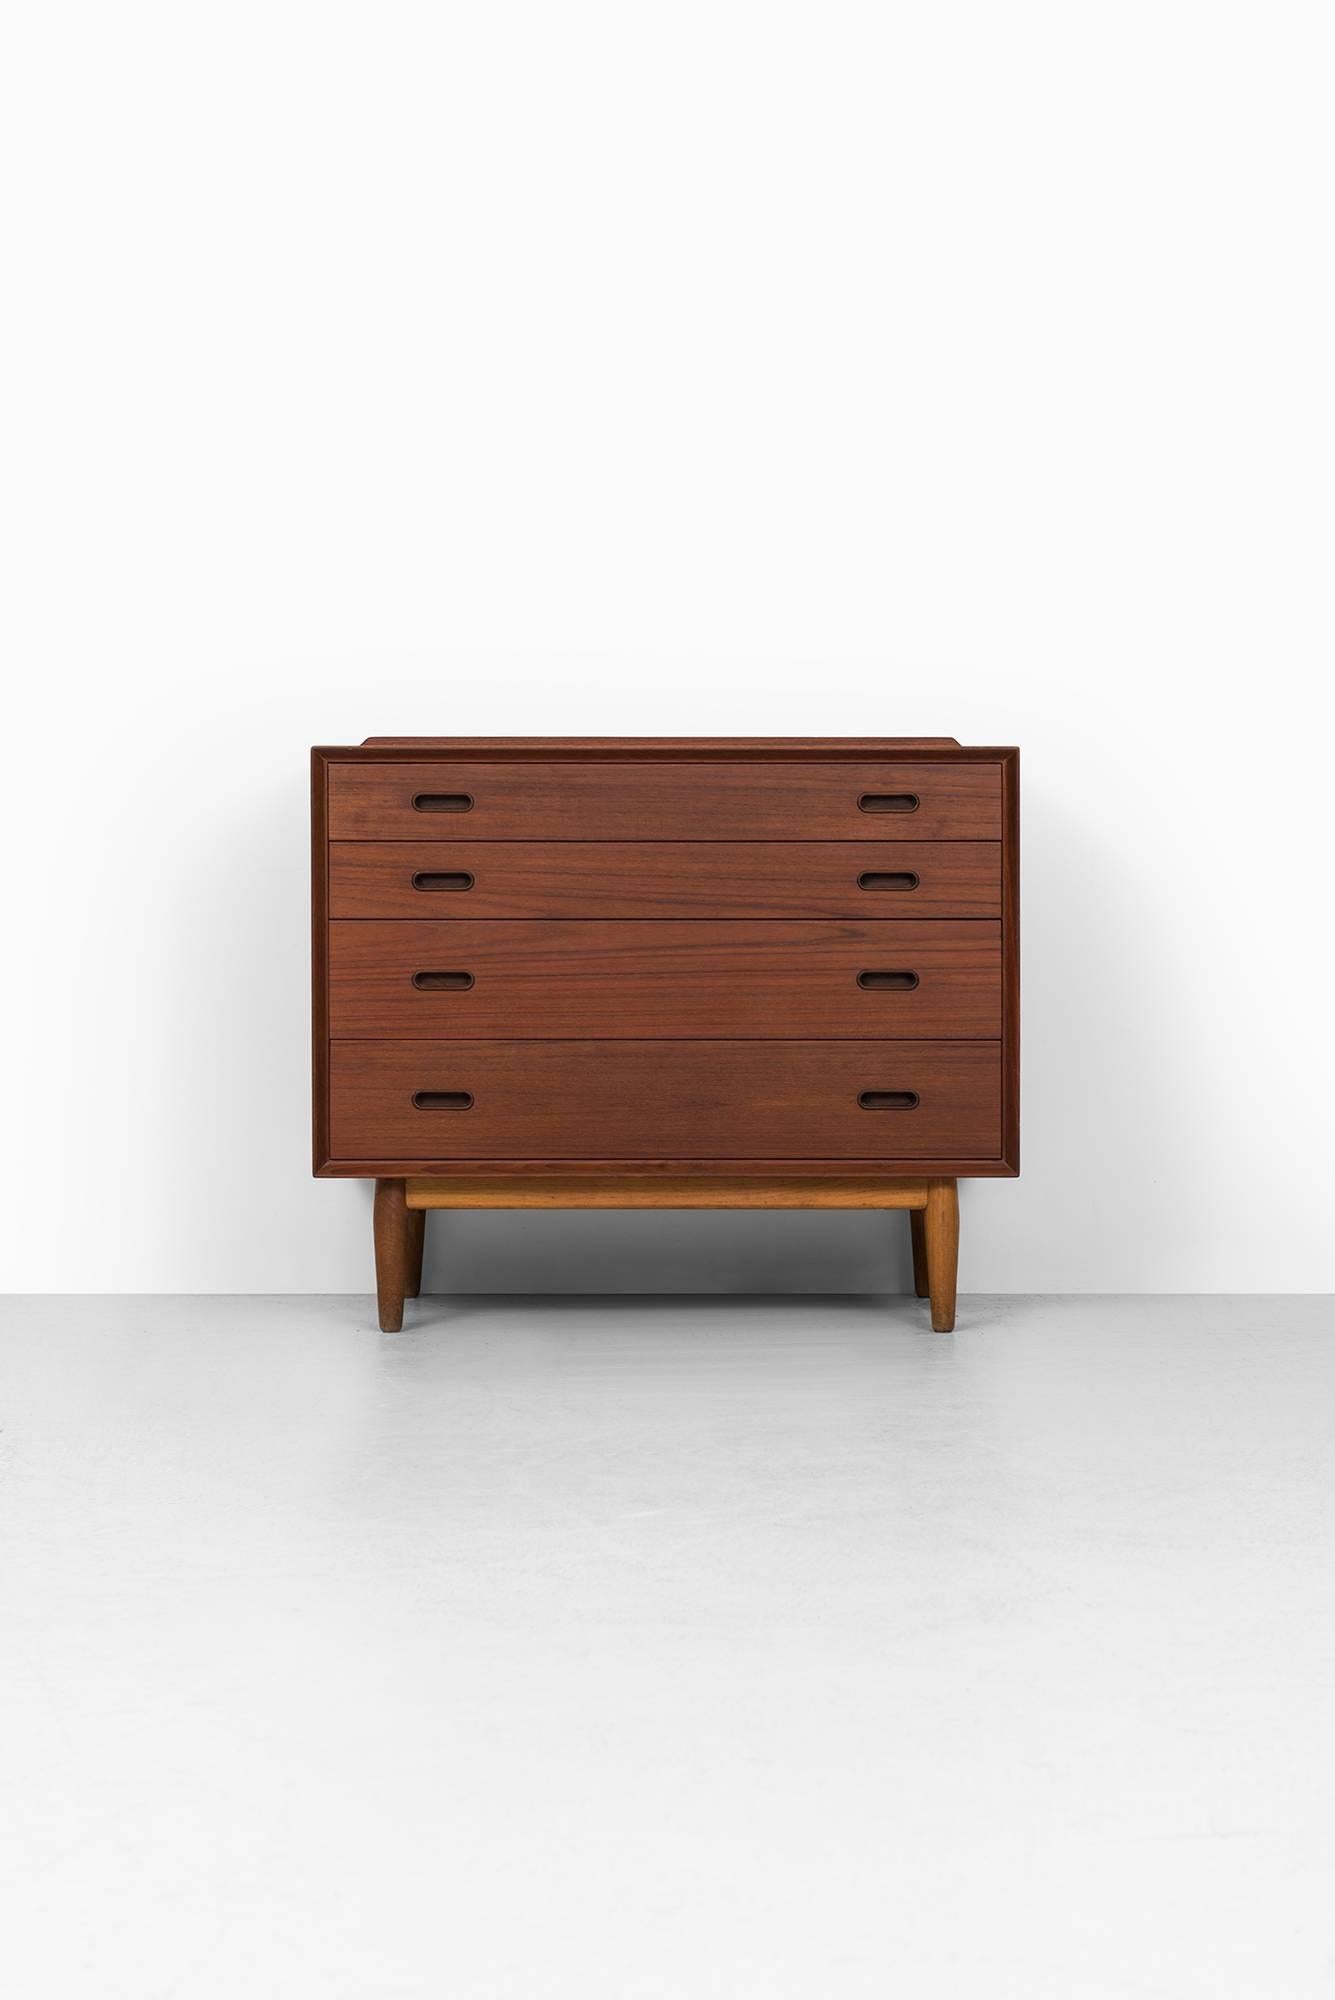 Rare small sideboard or bureau designed by Arne Vodder. Produced by Sibast in Denmark.